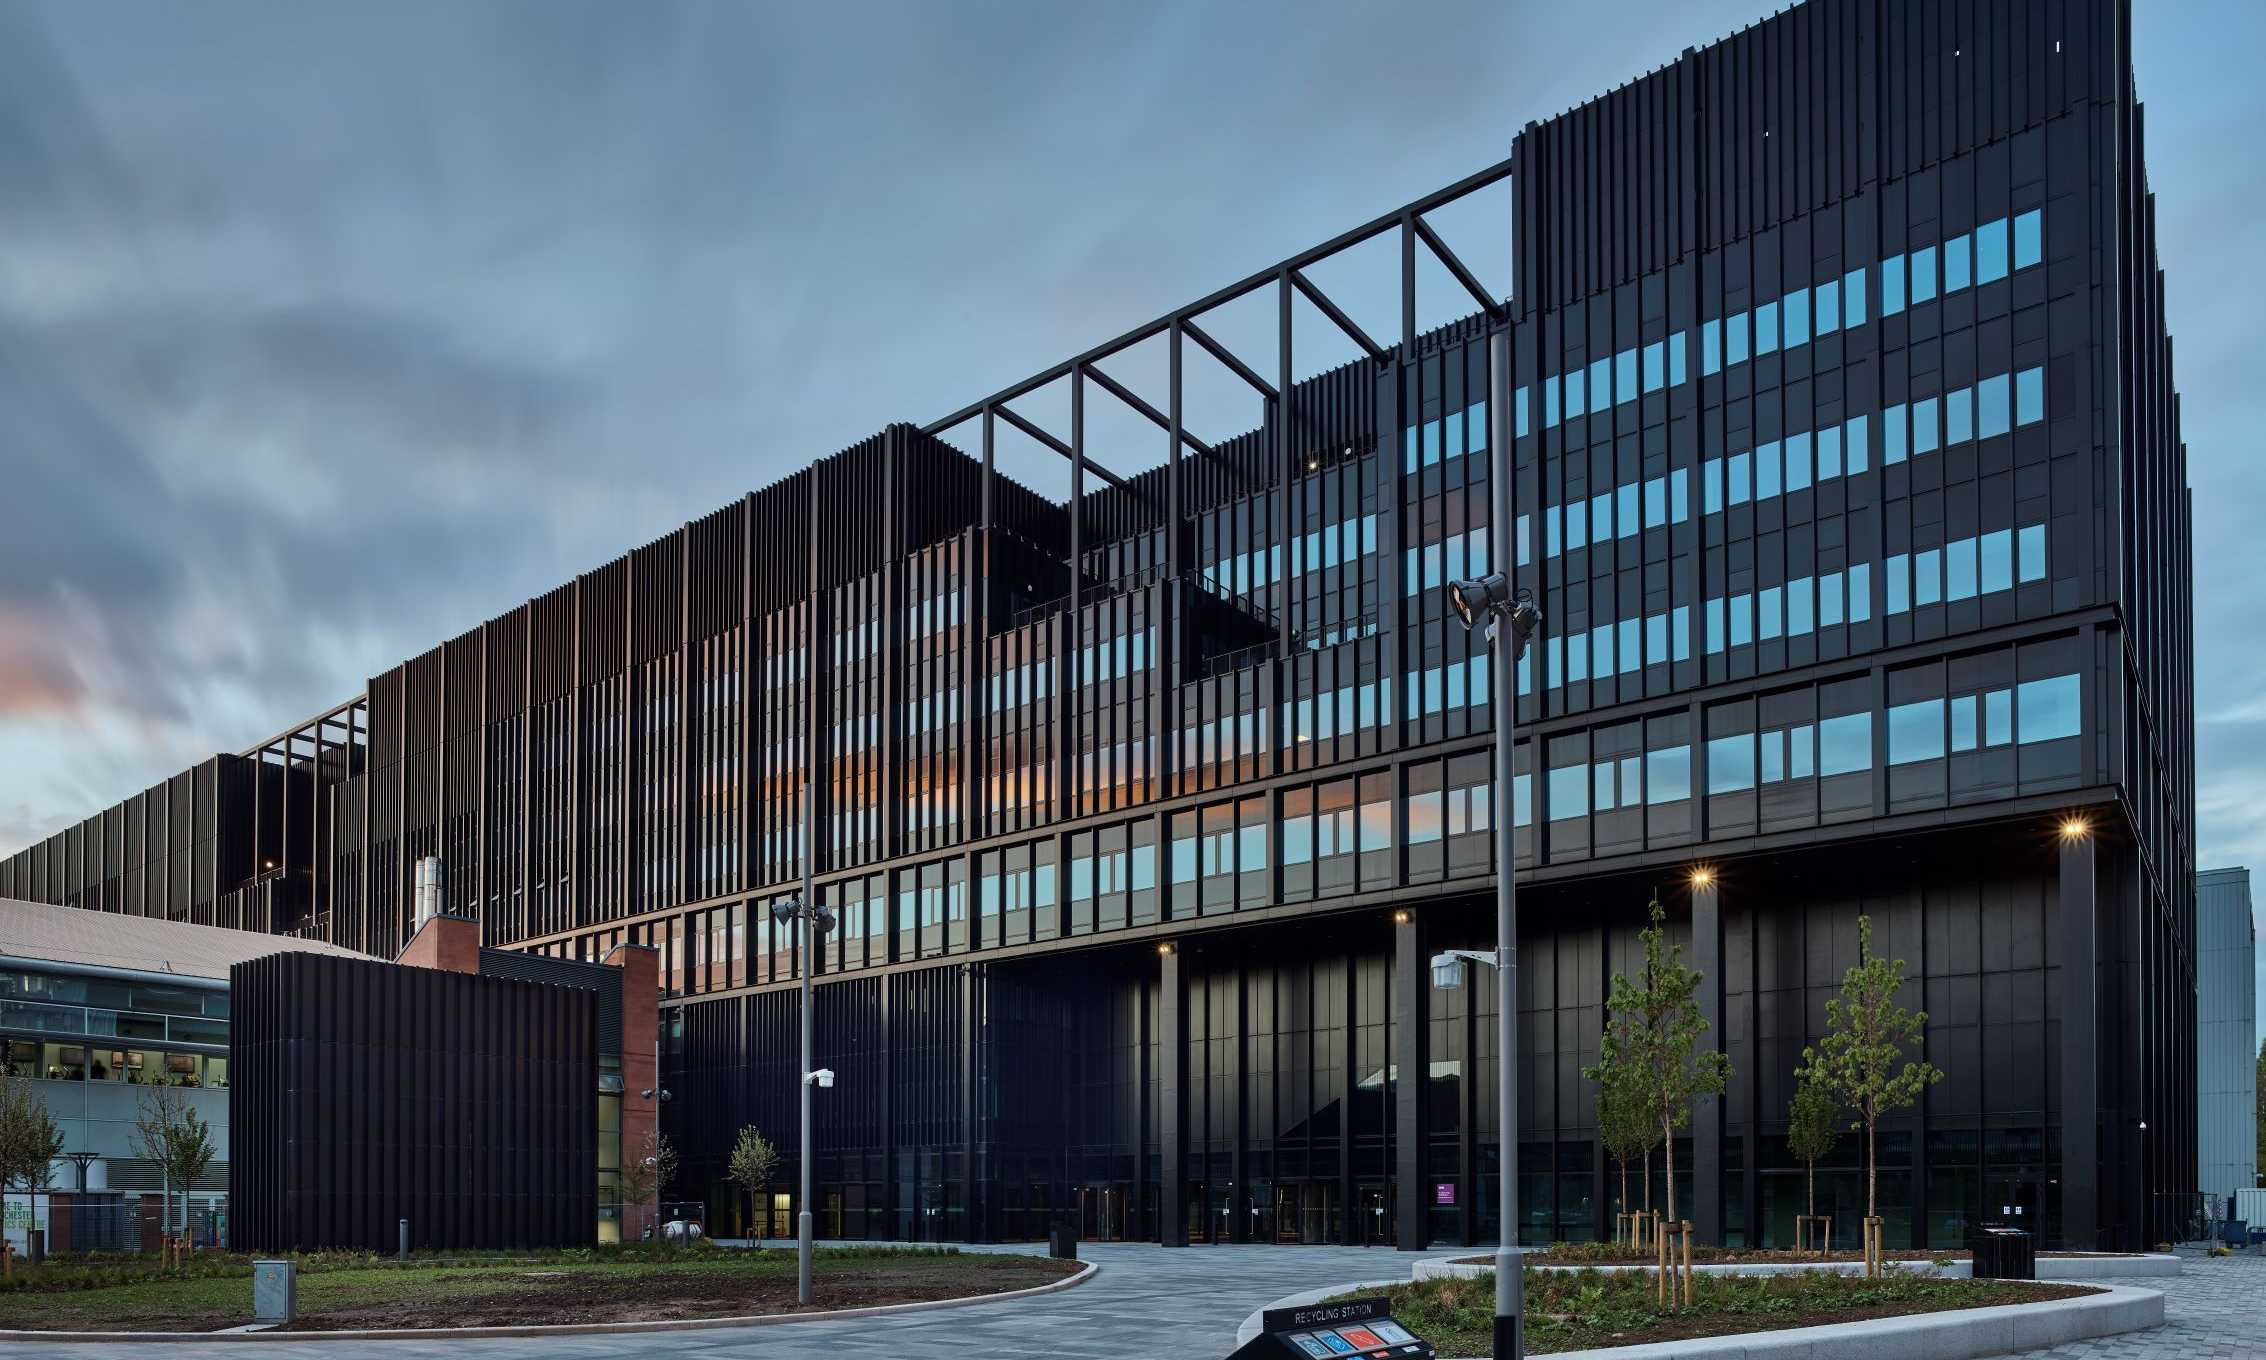 Construction completed on UK’s largest engineering campus at The University of Manchester